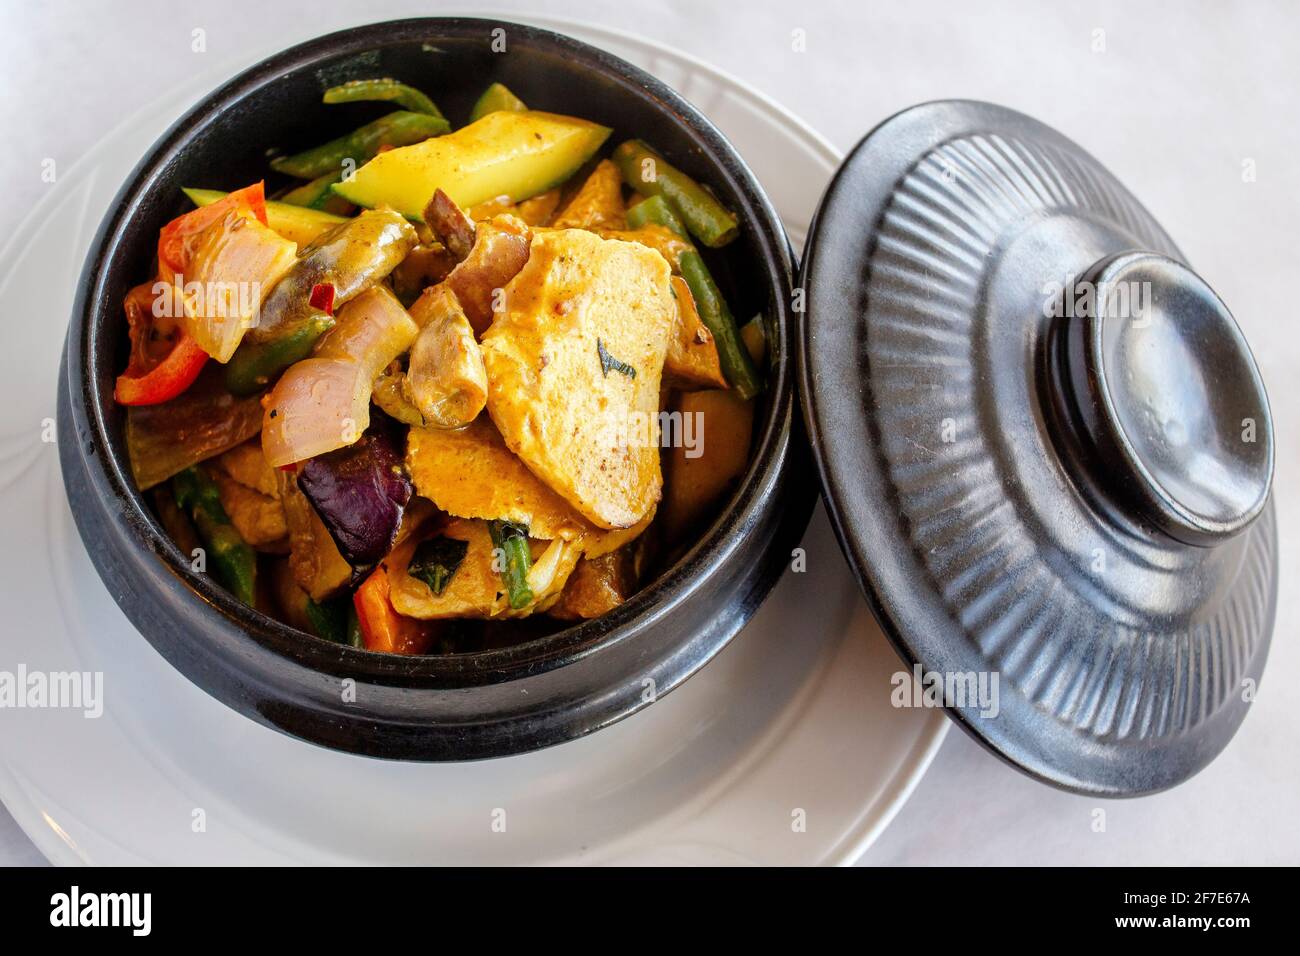 Clay pot of Chinese tofu and vegetable in sauce Stock Photo